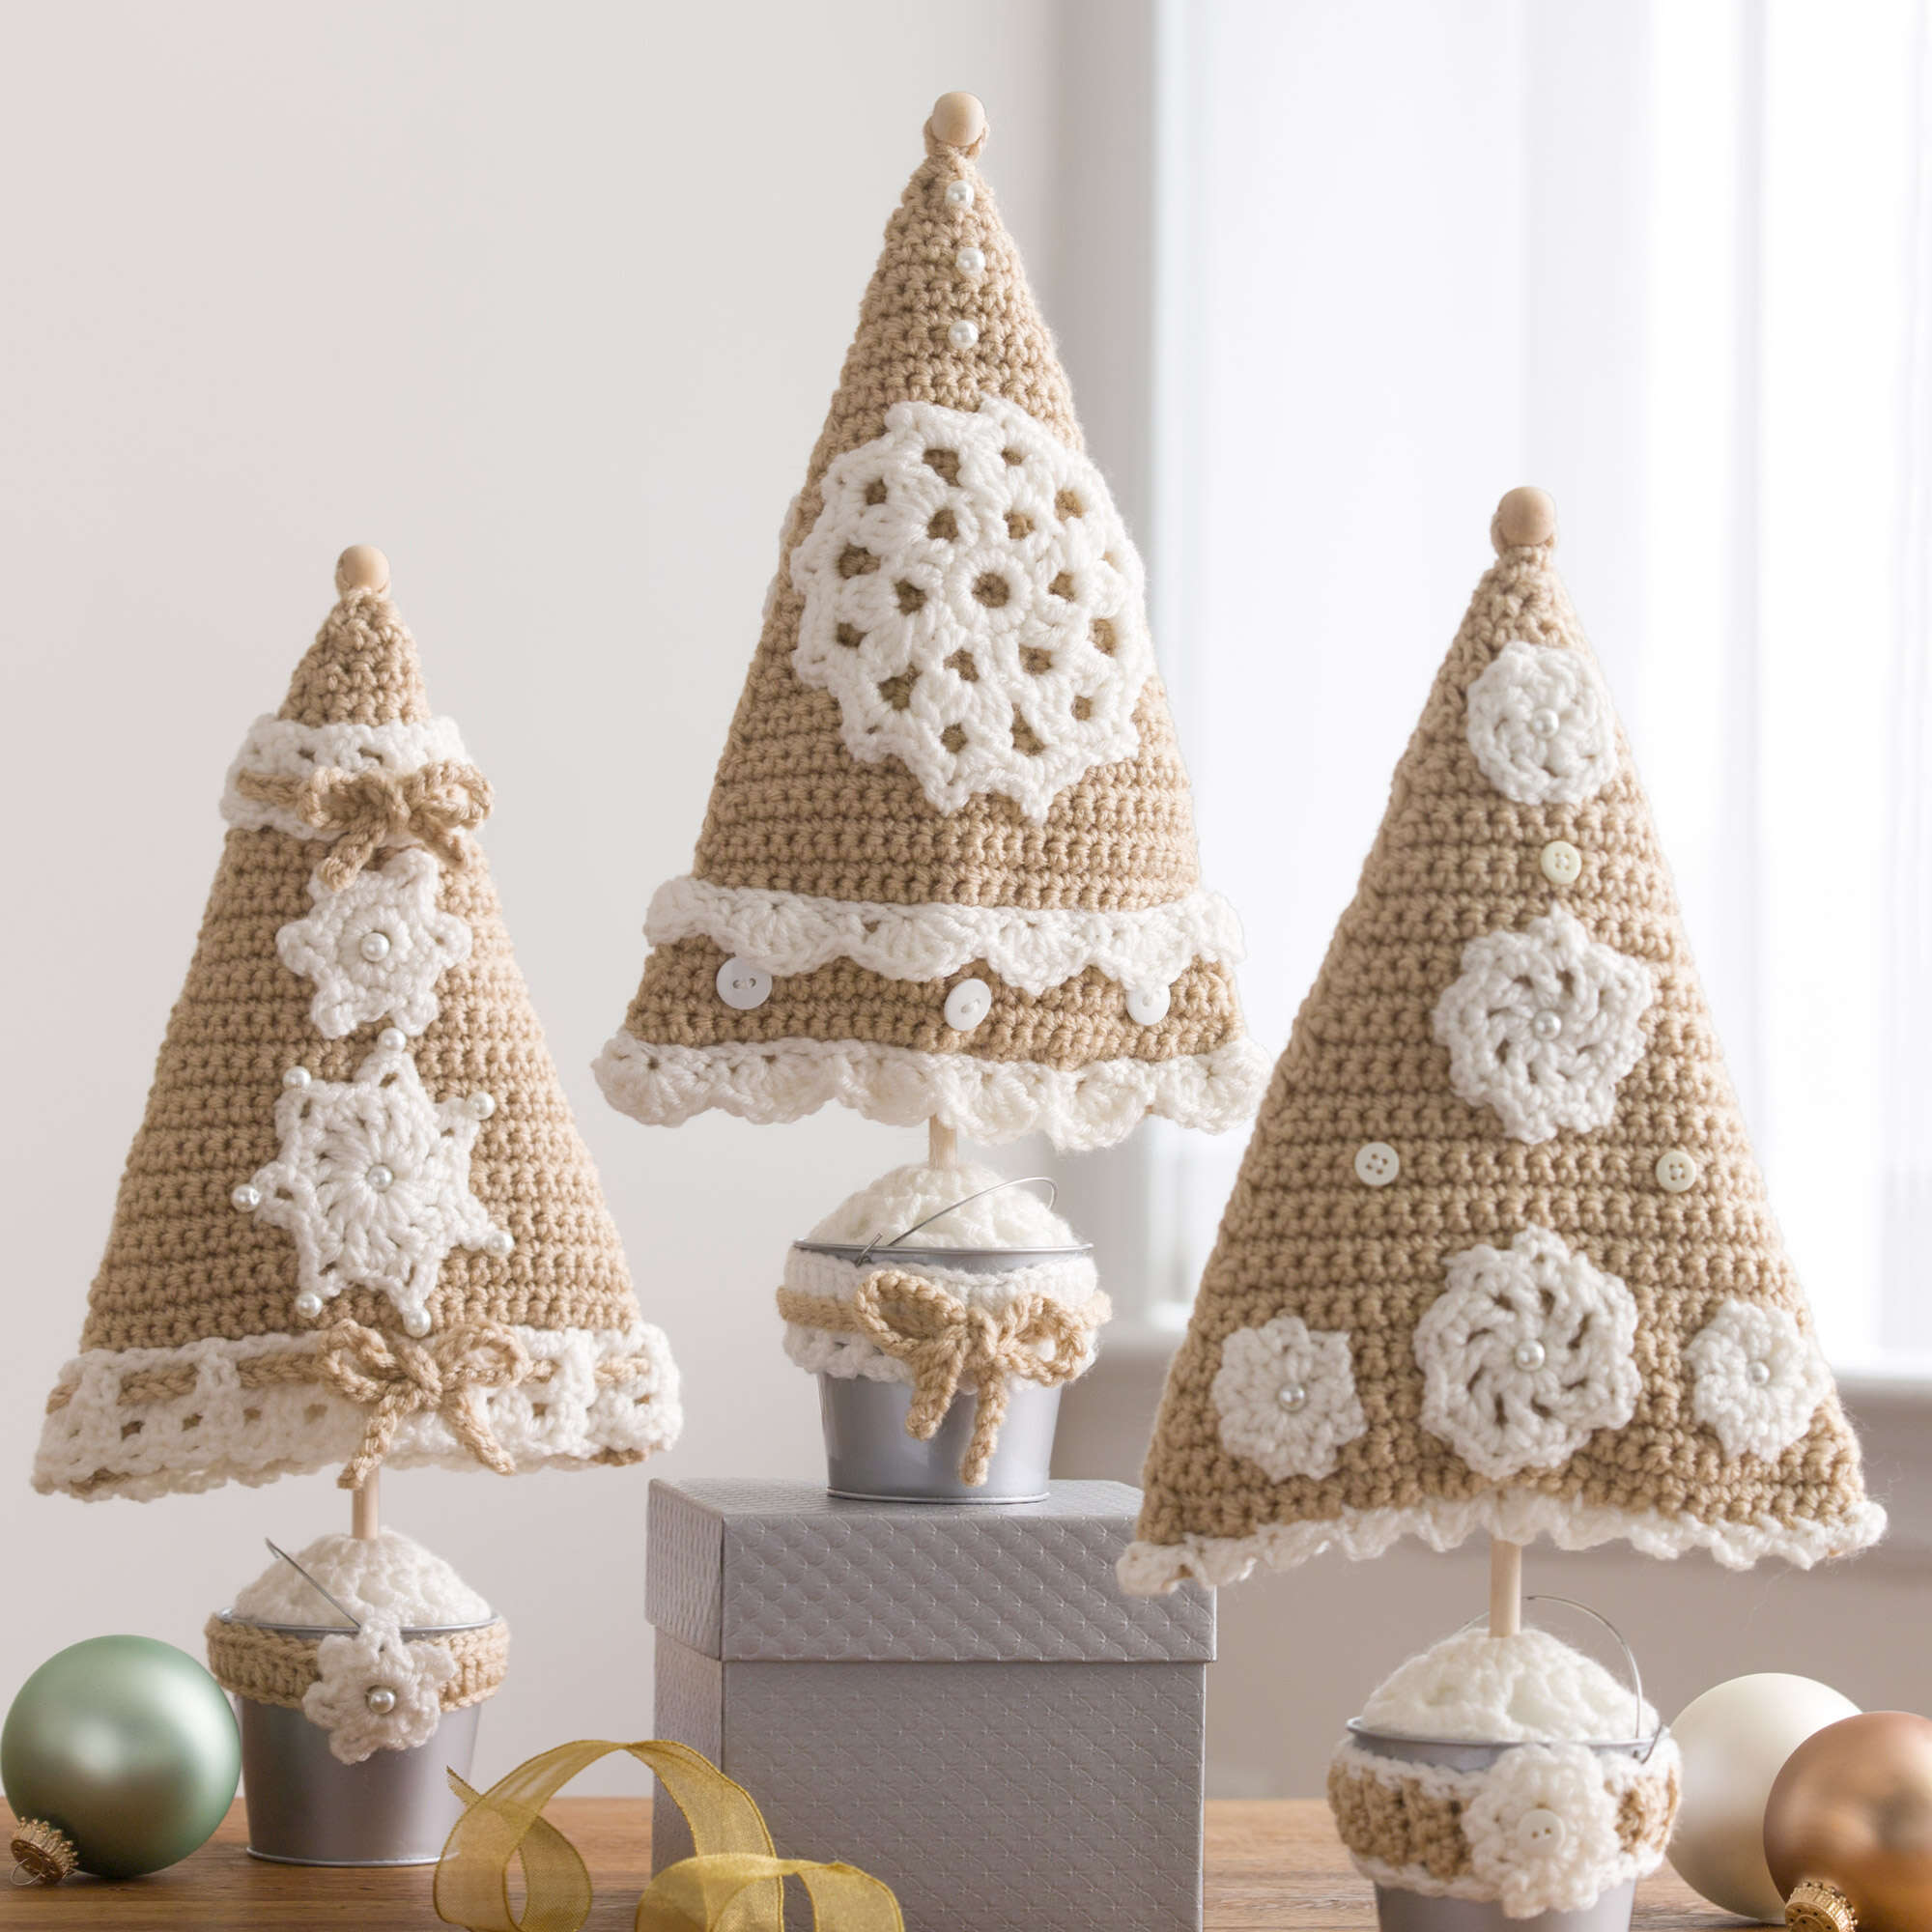 Wholesale polystyrene cones For Defining Your Christmas 